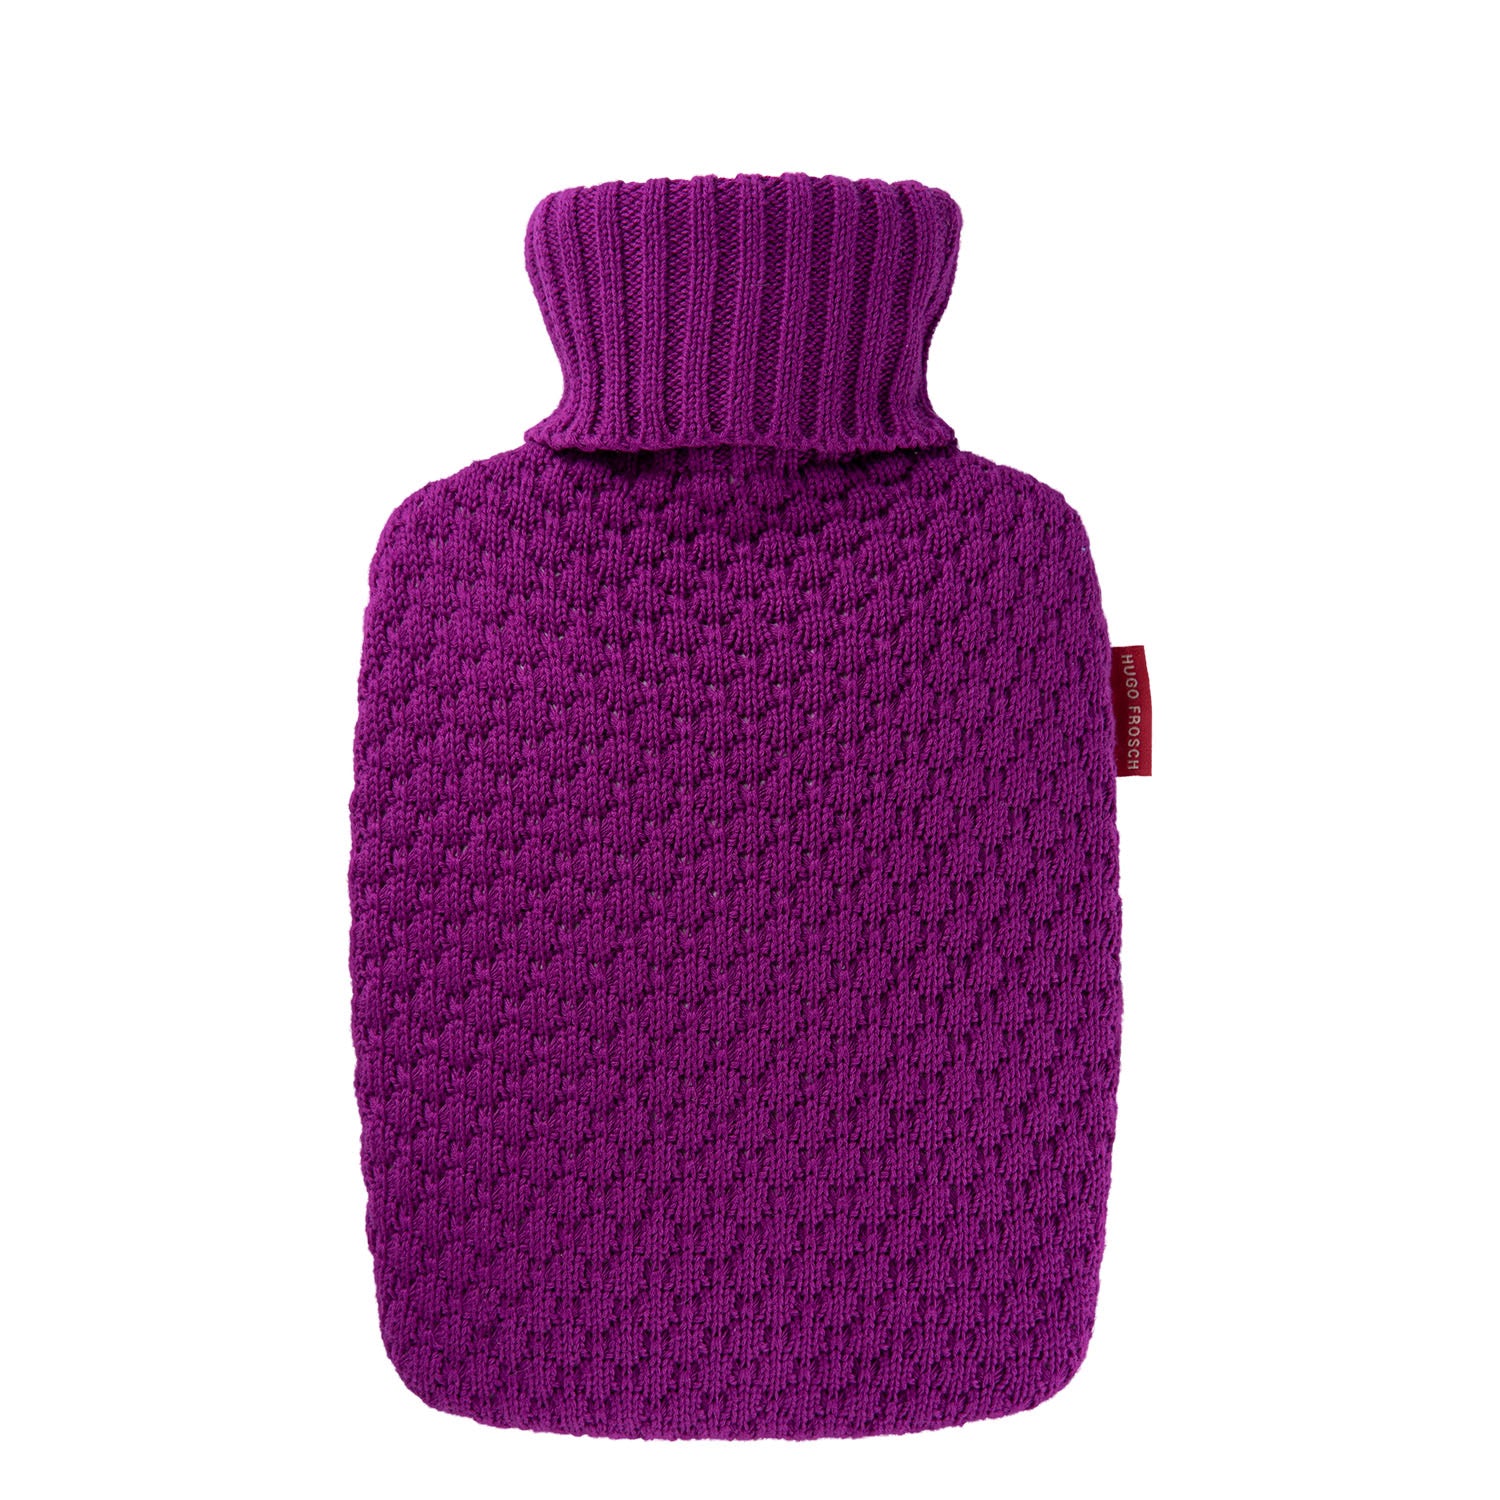 1.8 Litre Classic Plant Based Hot Water Bottle with Raspberry Knit Organic Cotton Cover (rubberless)